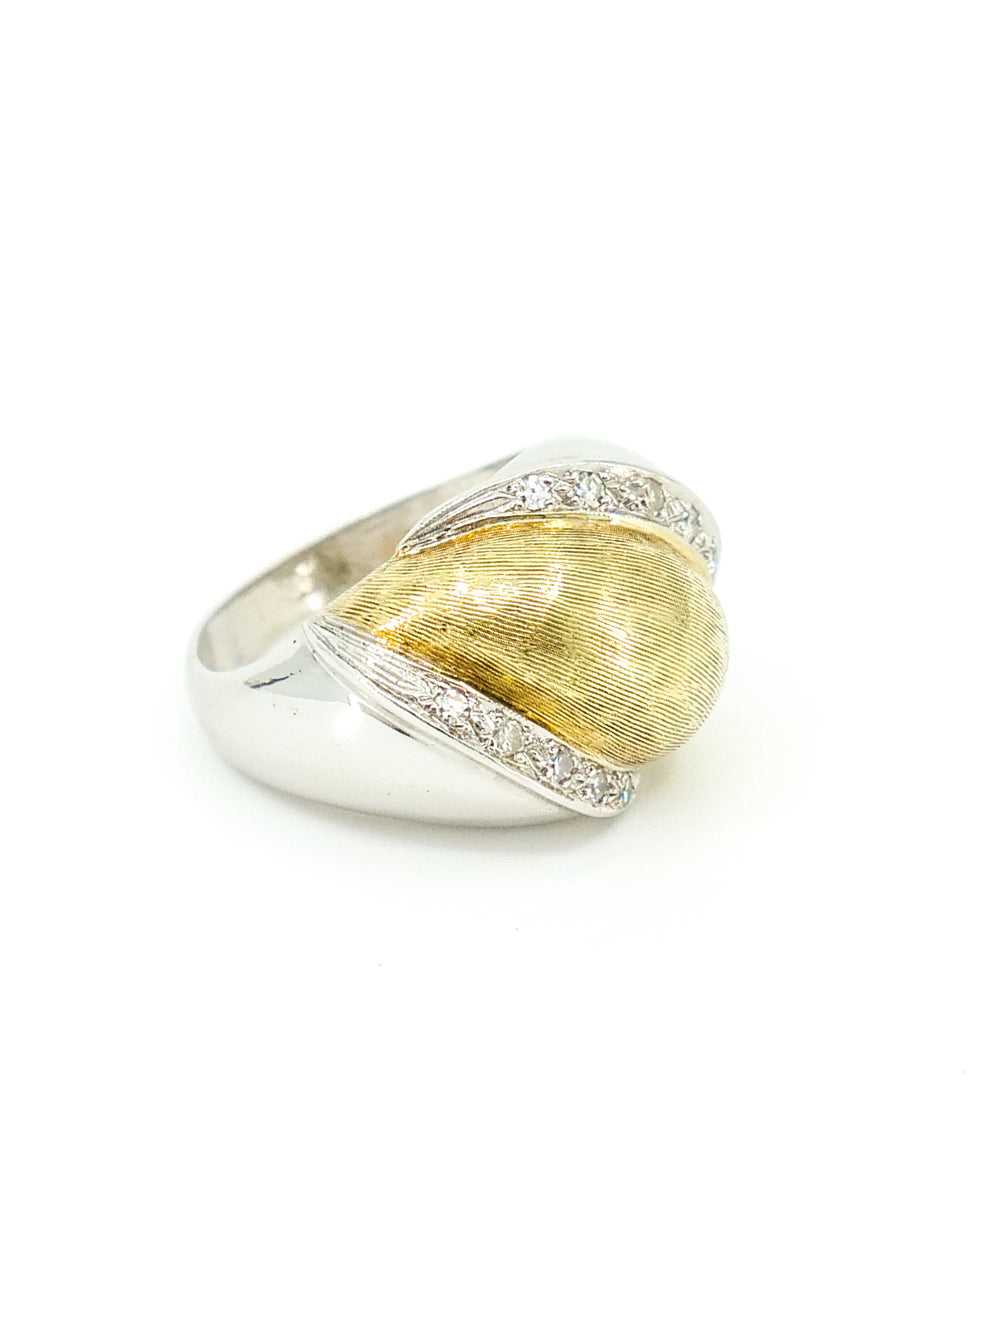 14K Yellow and White Gold Retro Style Dome Ring - image 3